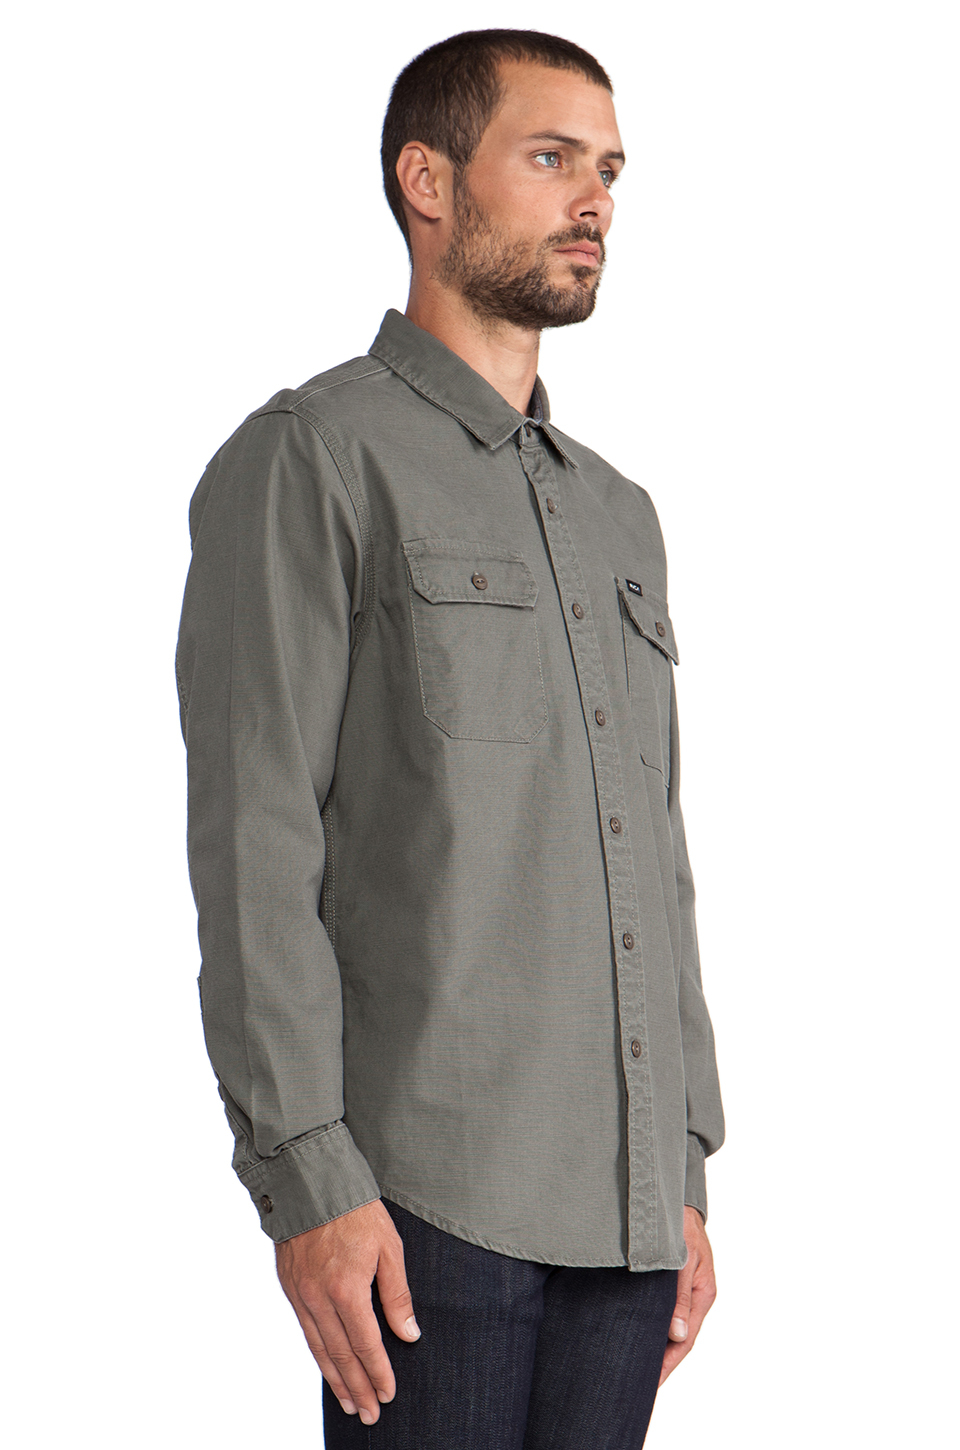 RVCA Highwayman Button Down in Sage in Gray for Men - Lyst